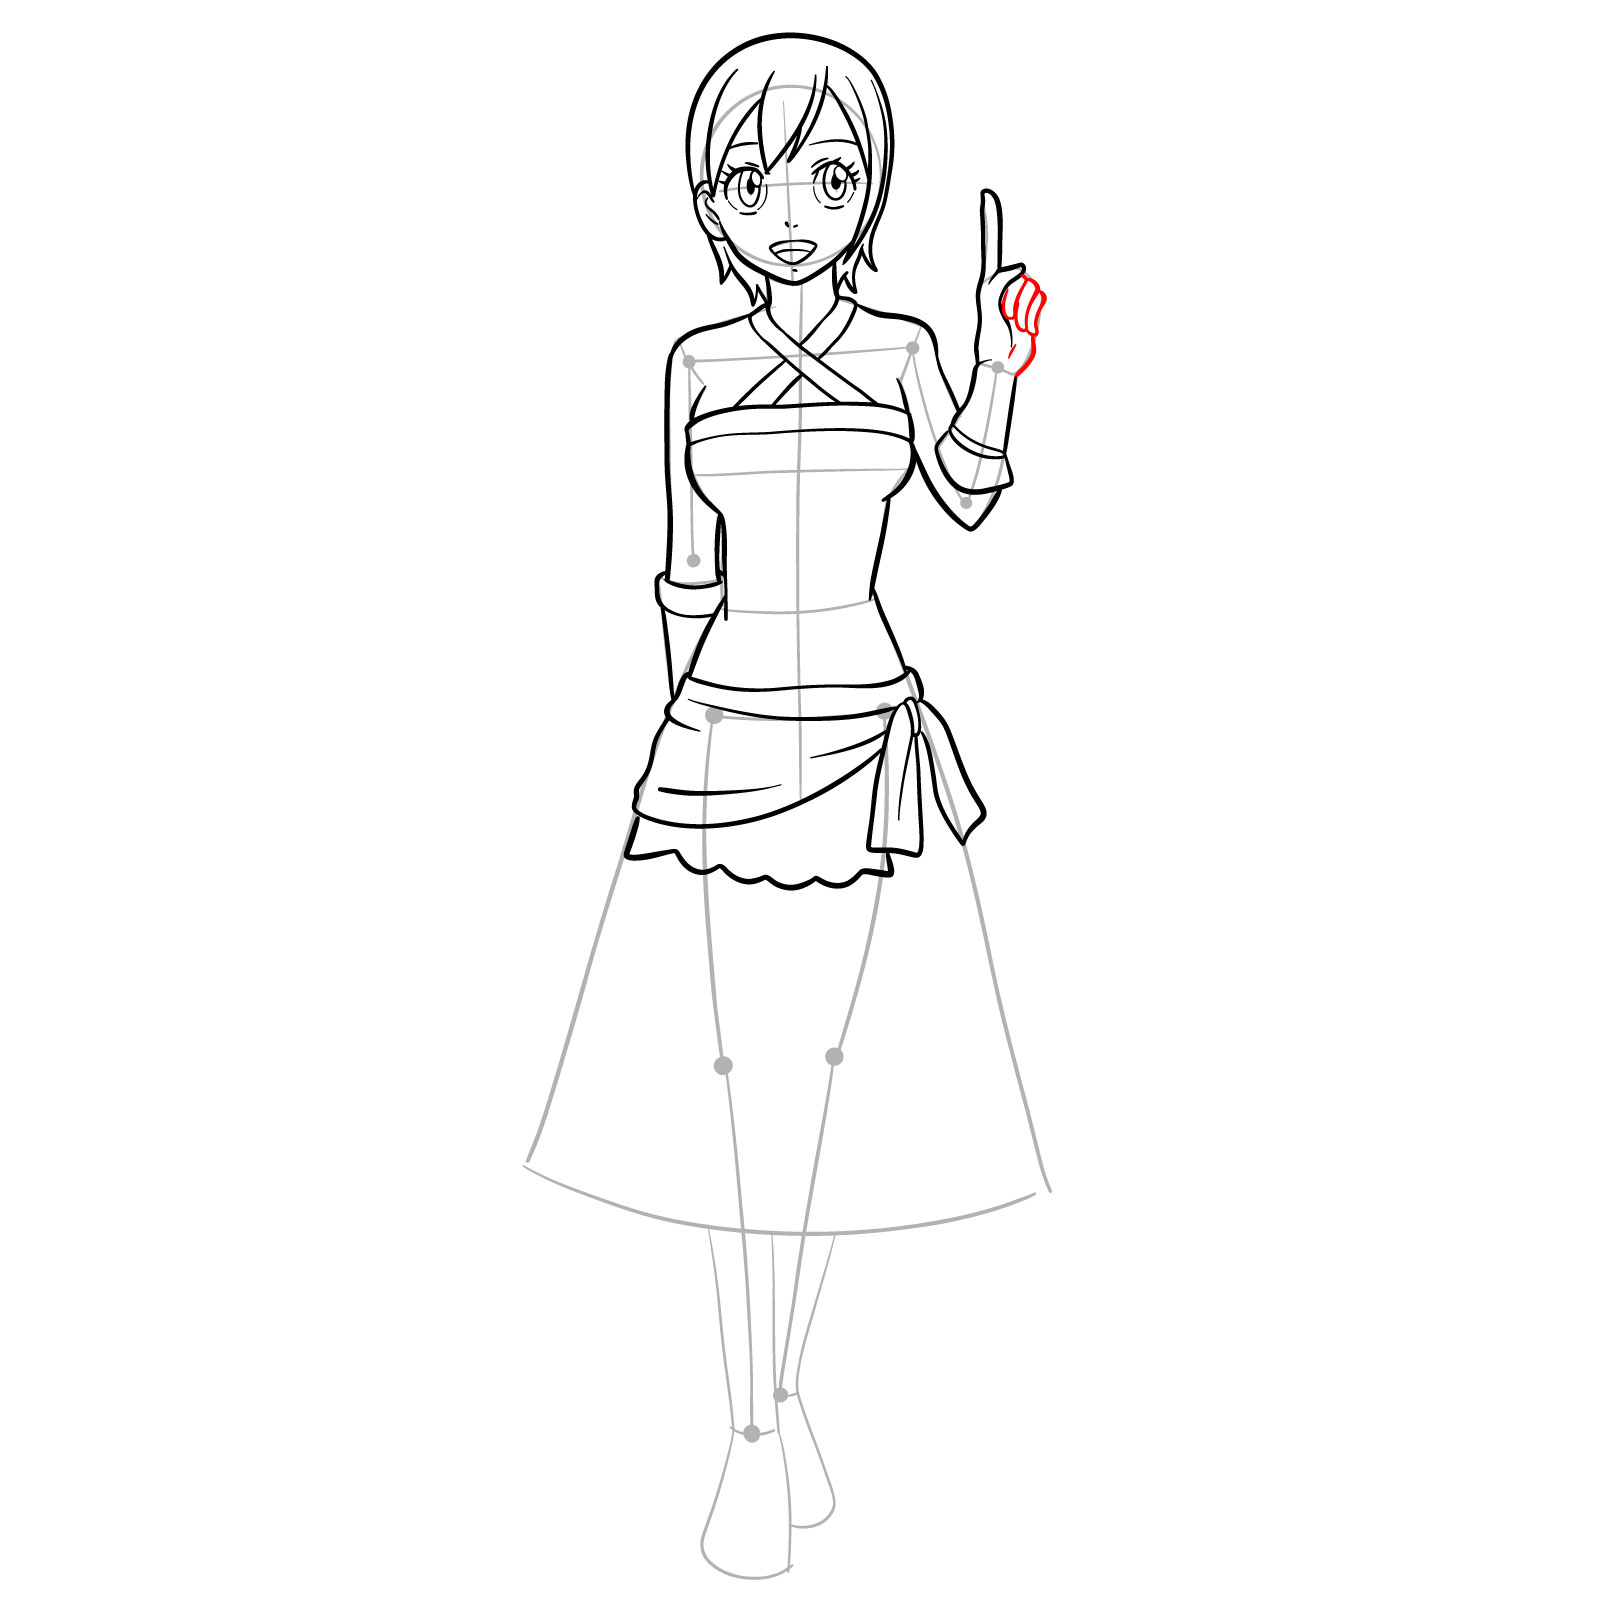 How to draw Lisanna Strauss from Fairy Tail - step 26